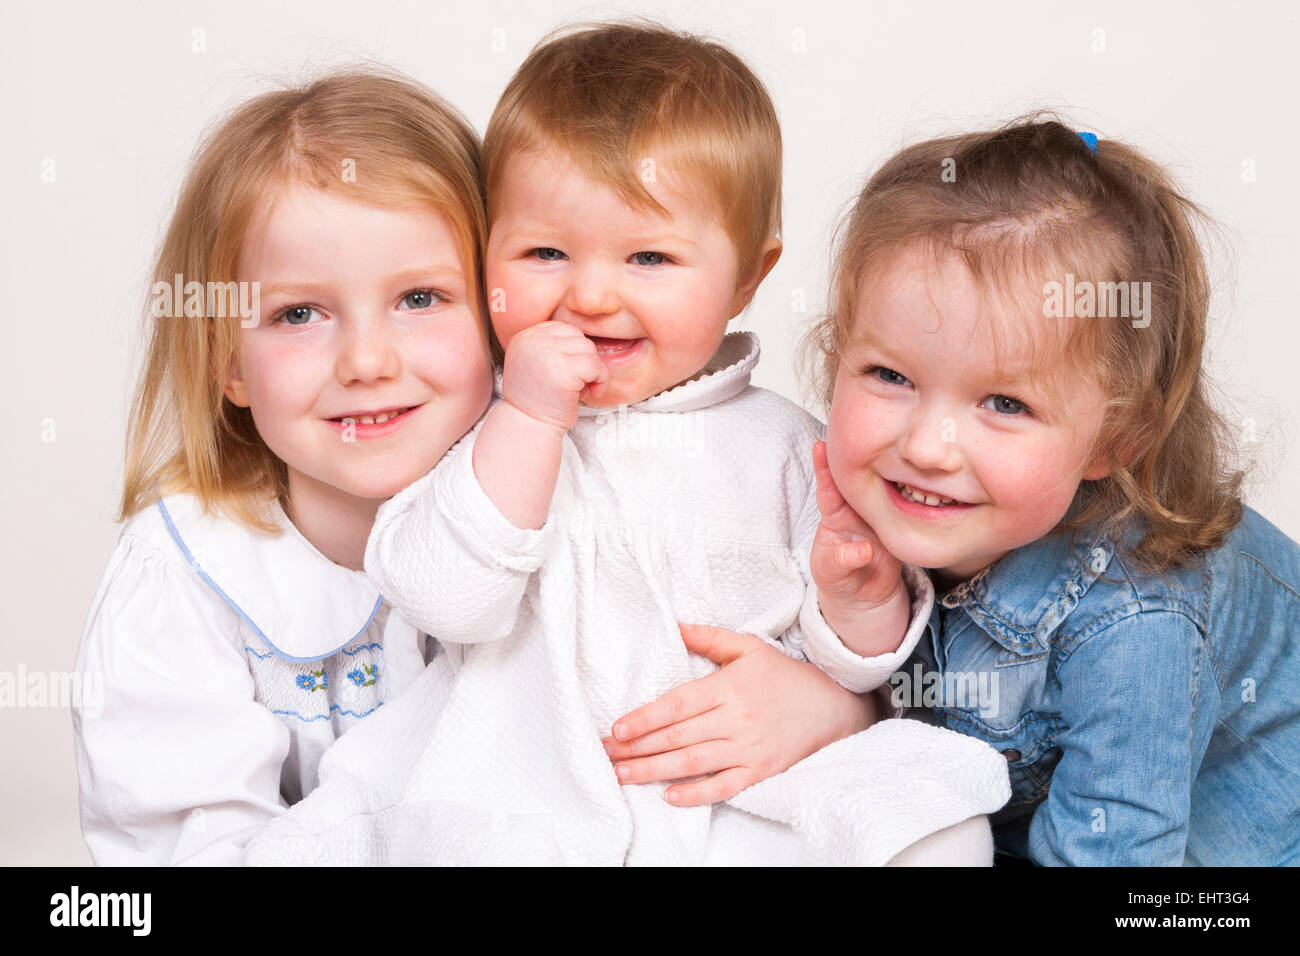 family-group-portrait-of-3-three-young-c